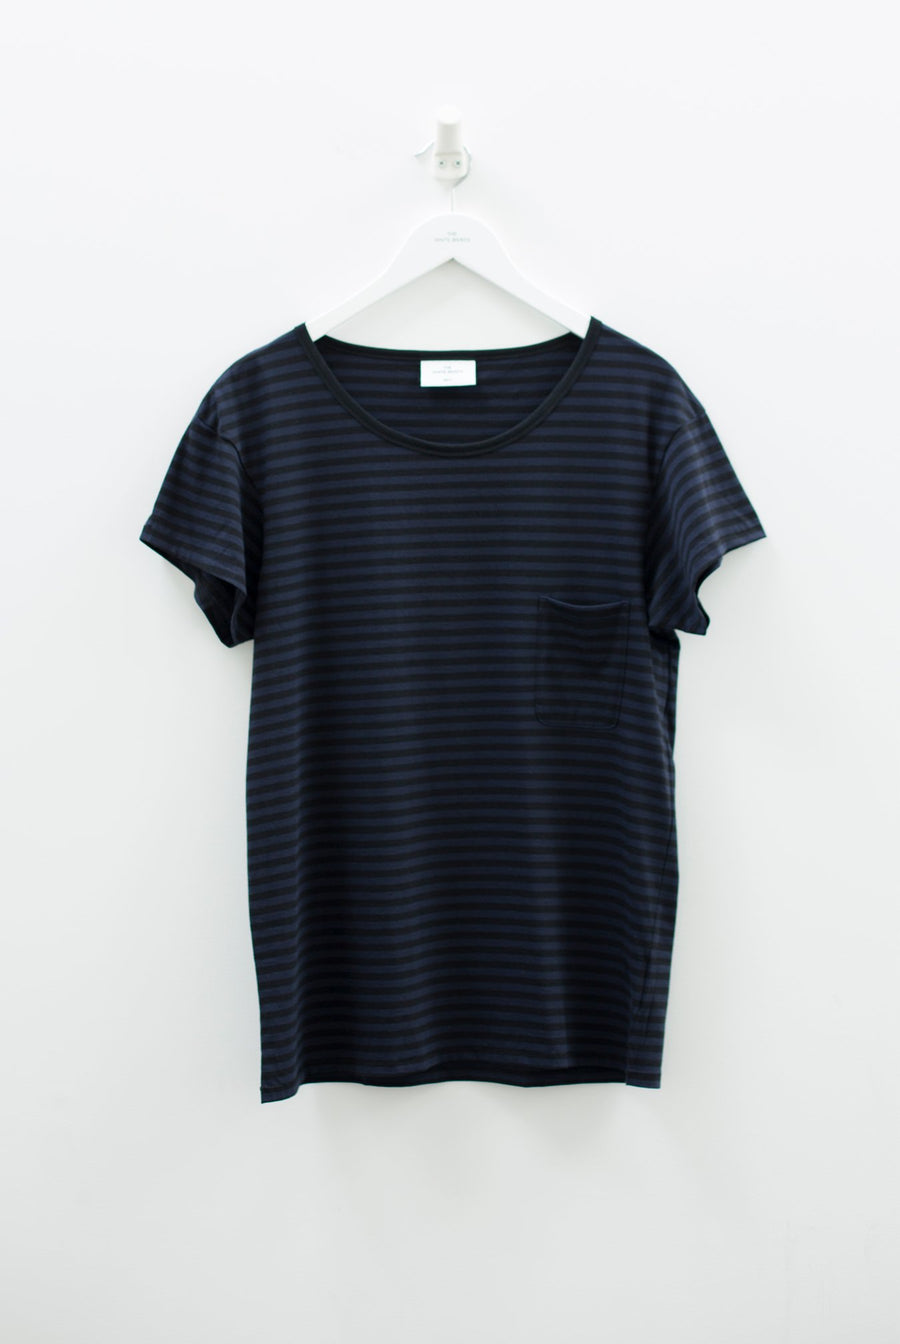 Women's loose fit organic cotton Paris t-shirt in a navy and black stripe